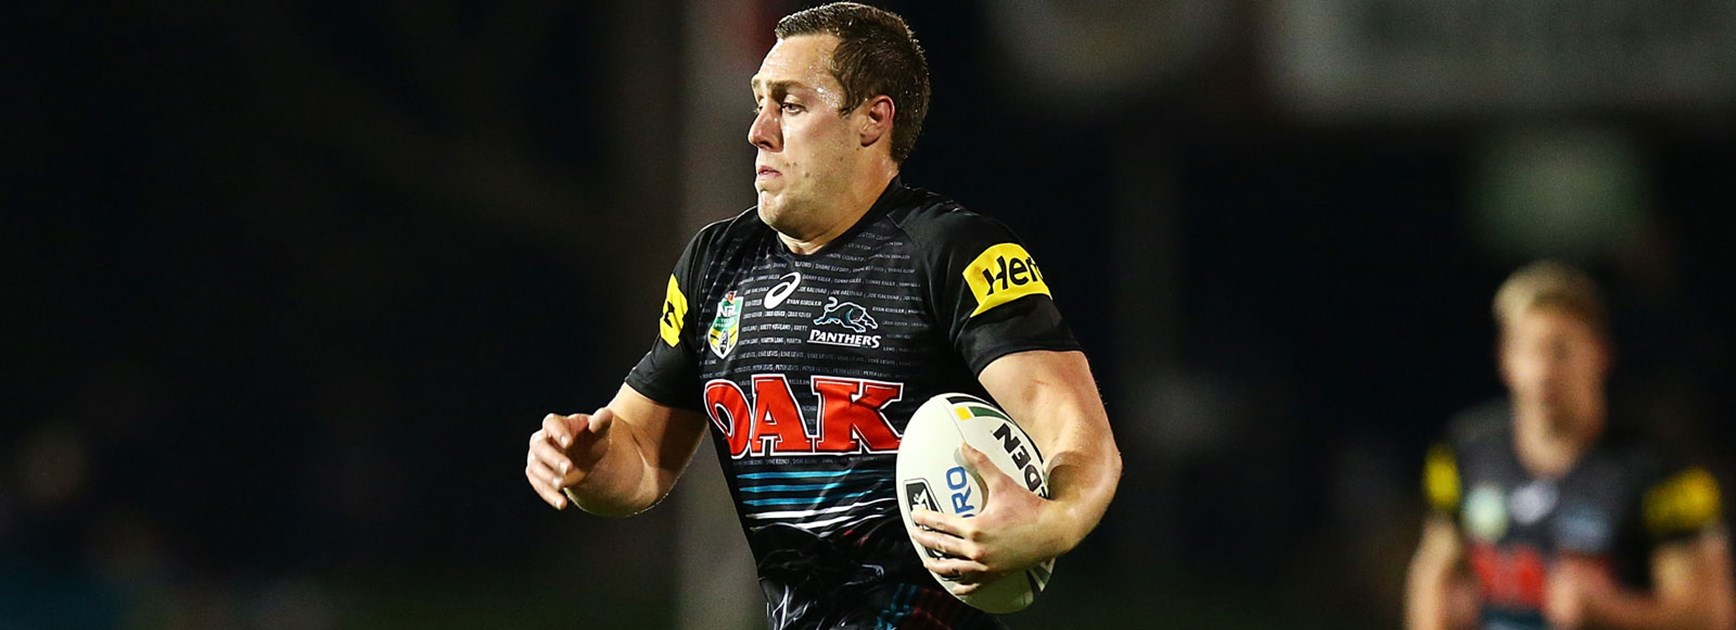 Panthers back-rower Isaah Yeo.